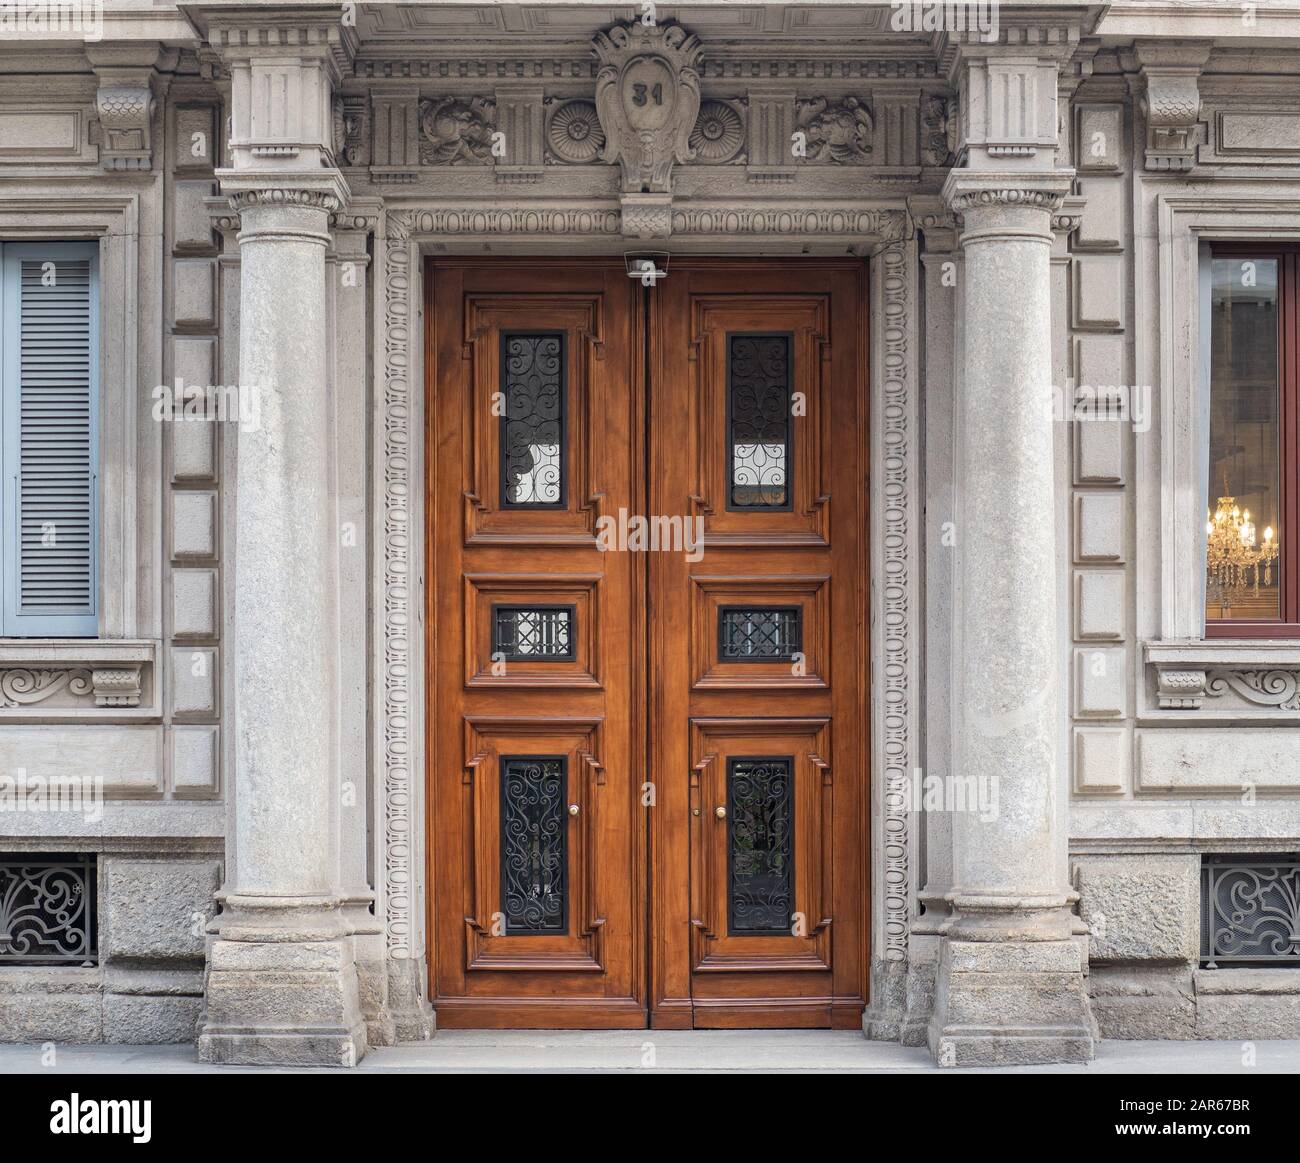 luxurious entrance door inserted between two columns, of a palace at number 31 on a street in Milan Stock Photo